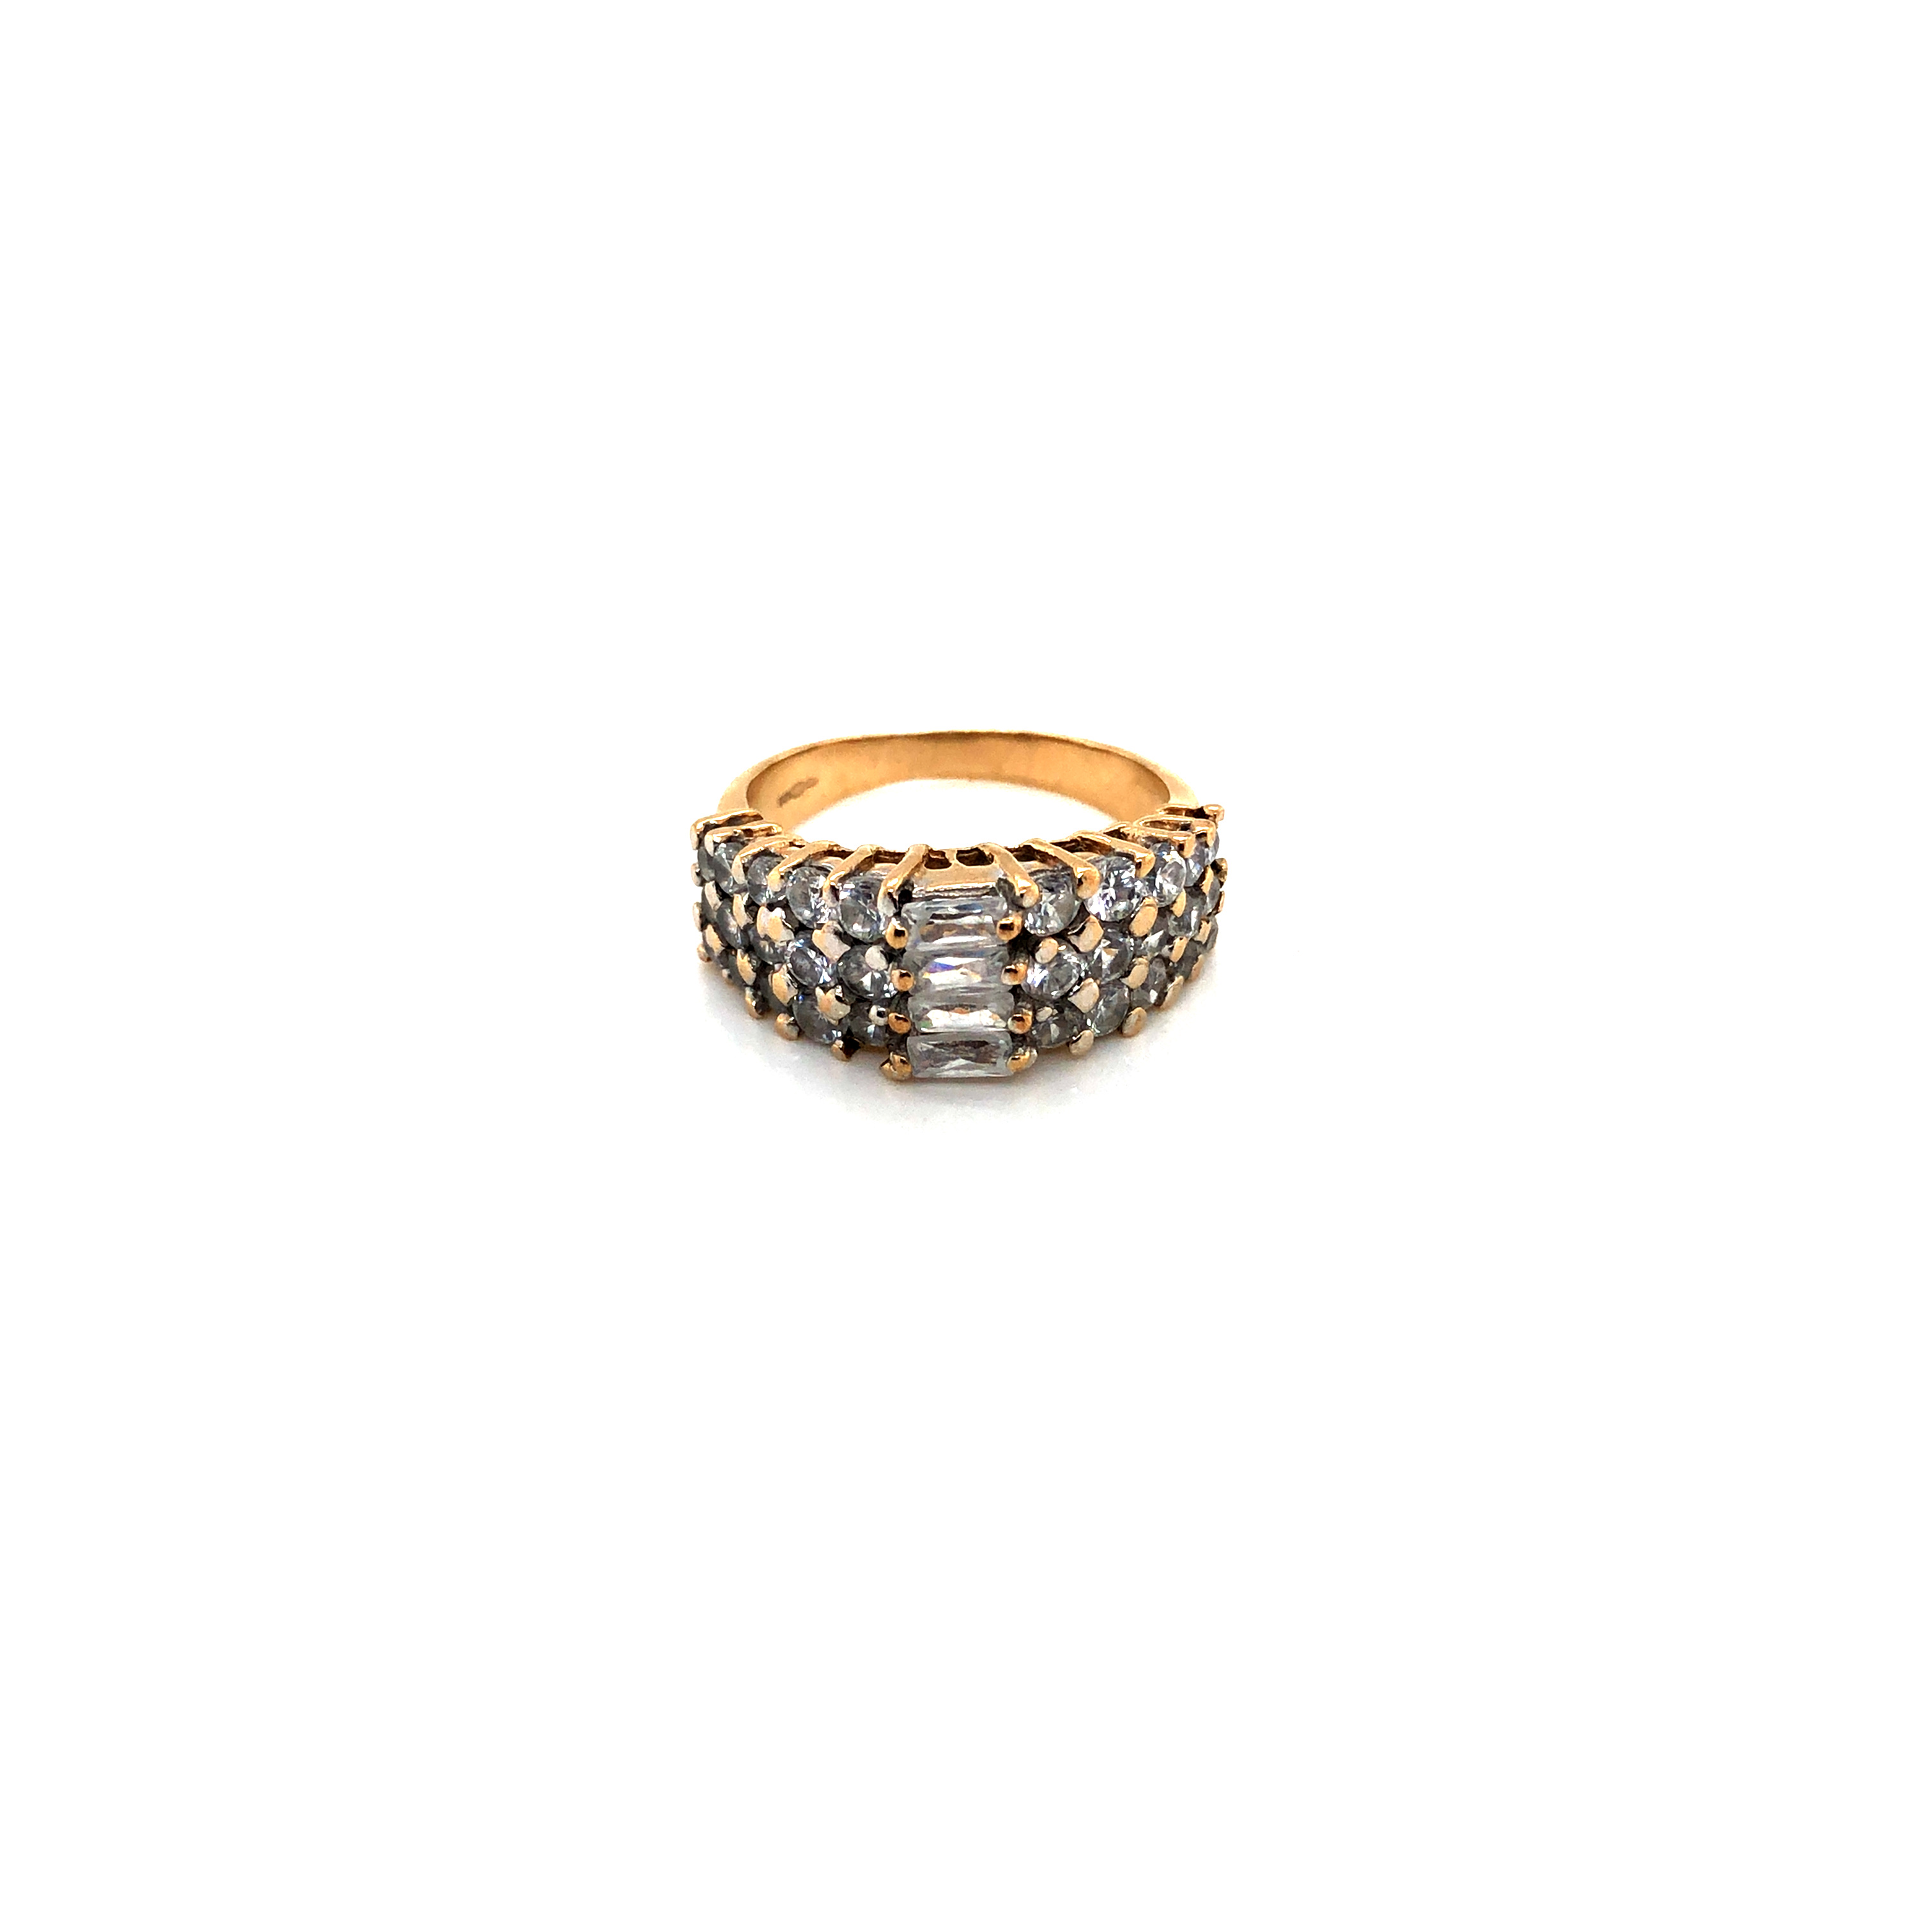 A HALLMARKED 9ct GOLD TAPERED CLAW SET CUBIC ZIRCONIA RING. FINGER SIZE N. WEIGHT 5.18grms.